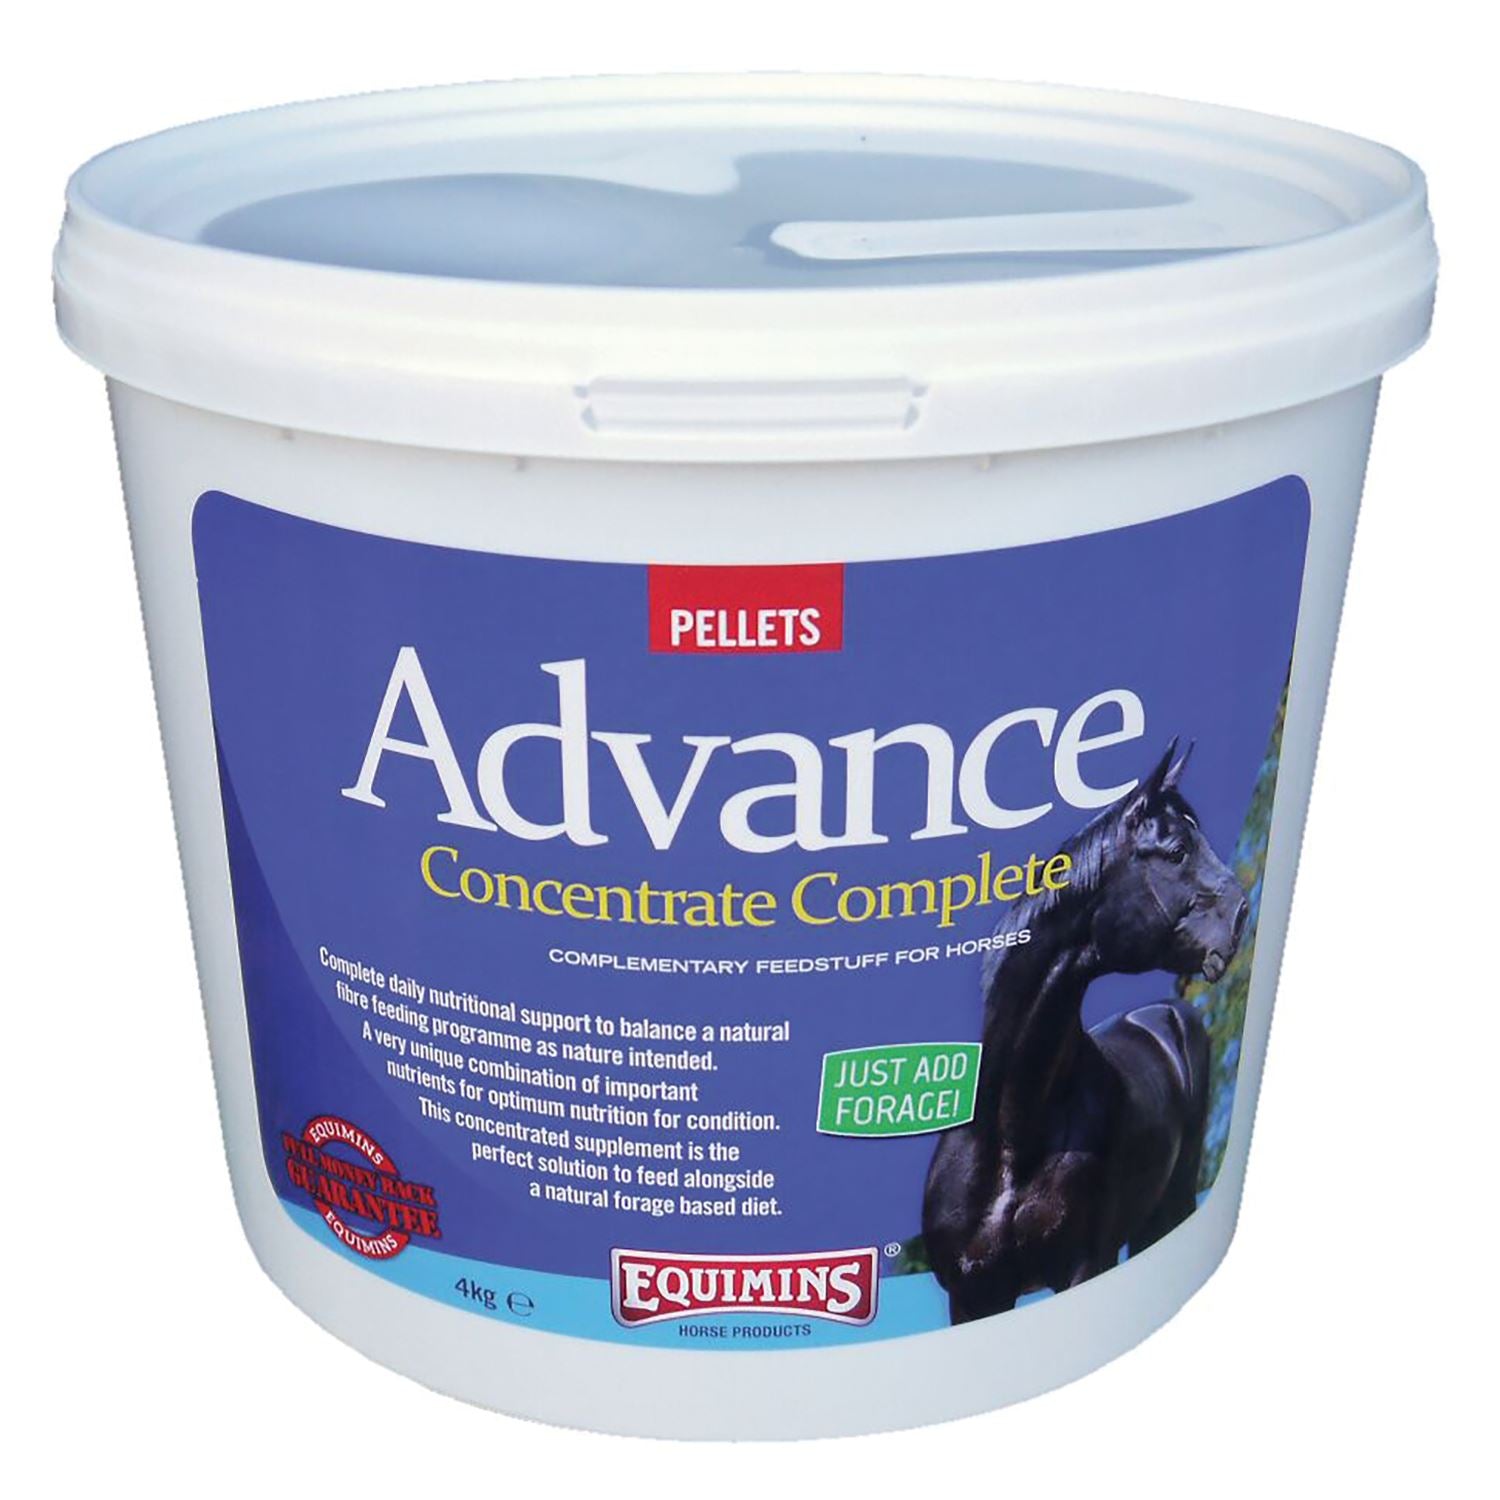 Equimins Advance Concentrate Complete Pellets: Bio-Available Mineral Rich Horse Feed